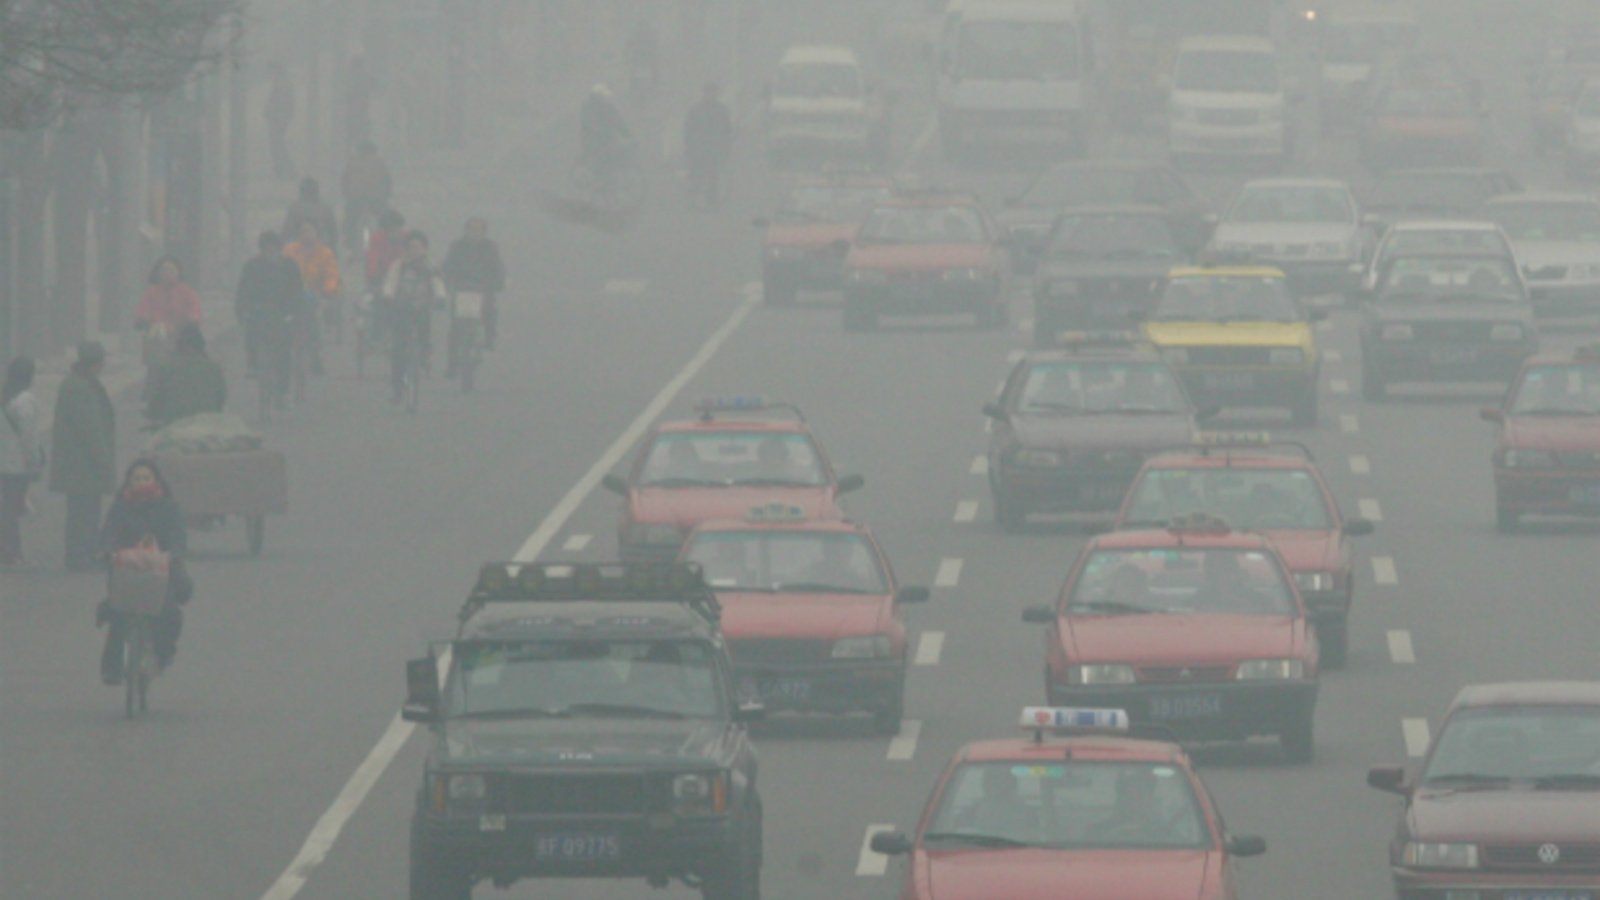 Air pollution on roads in China